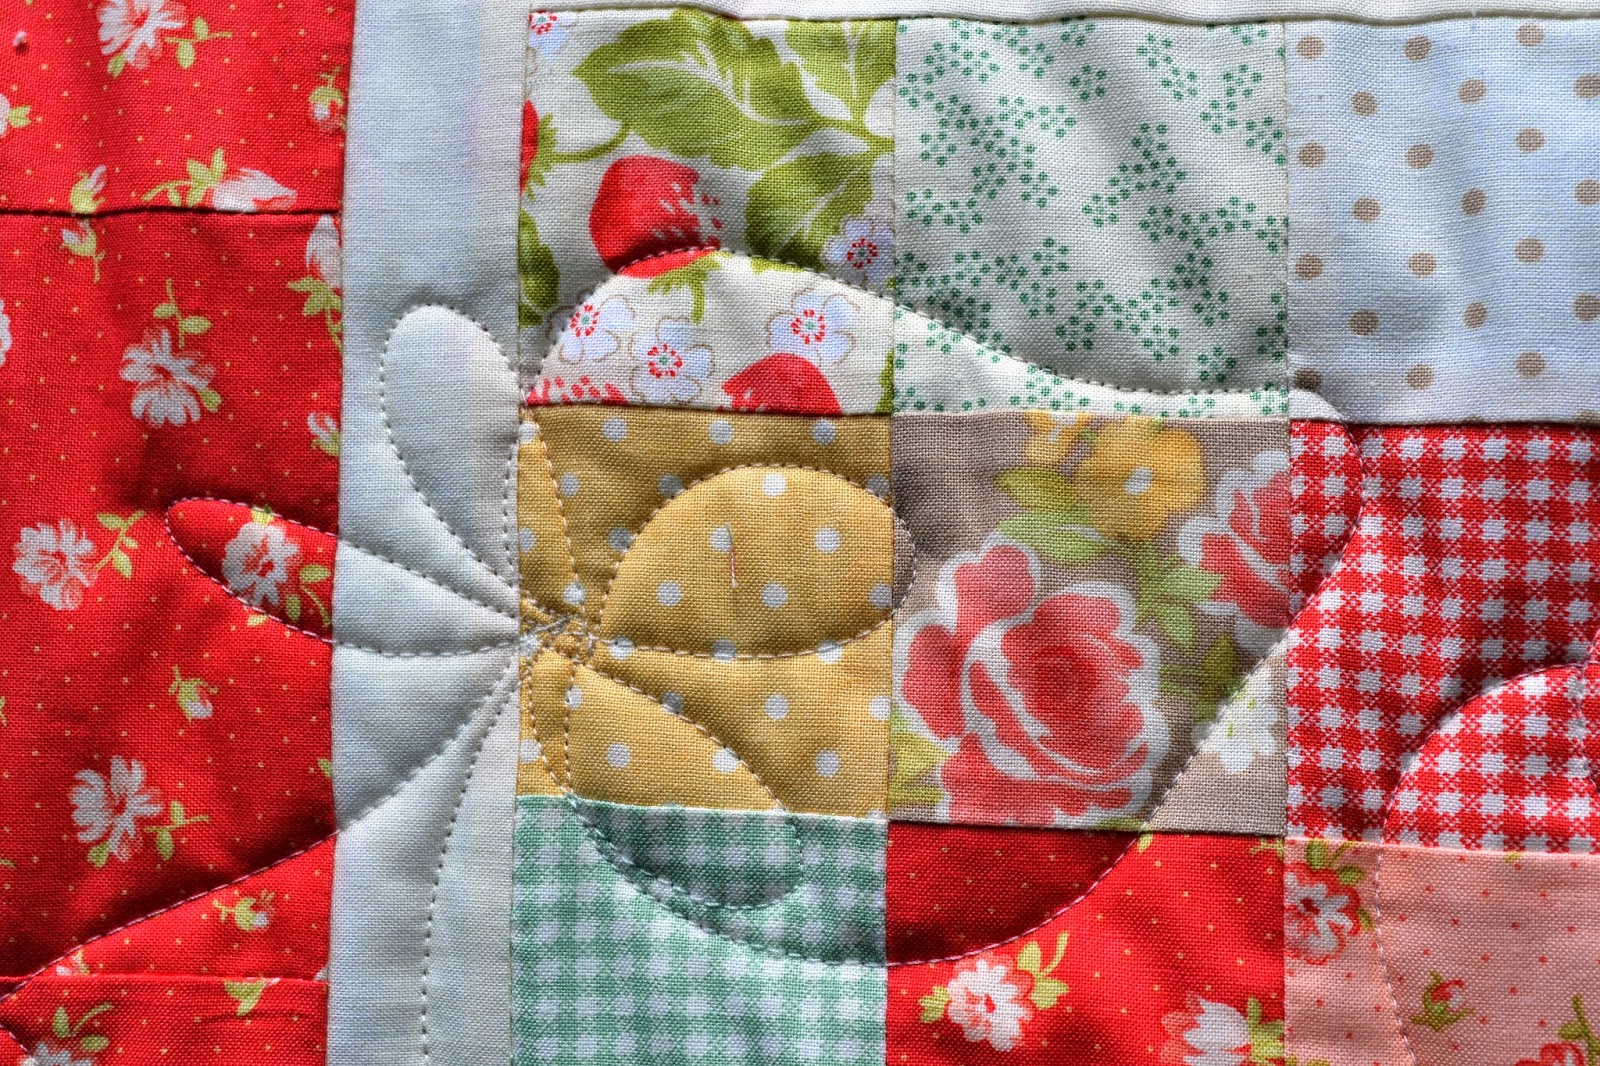 Porch Swing Quilts: Friday Finish: Strawberry Fields Shortcake quilt